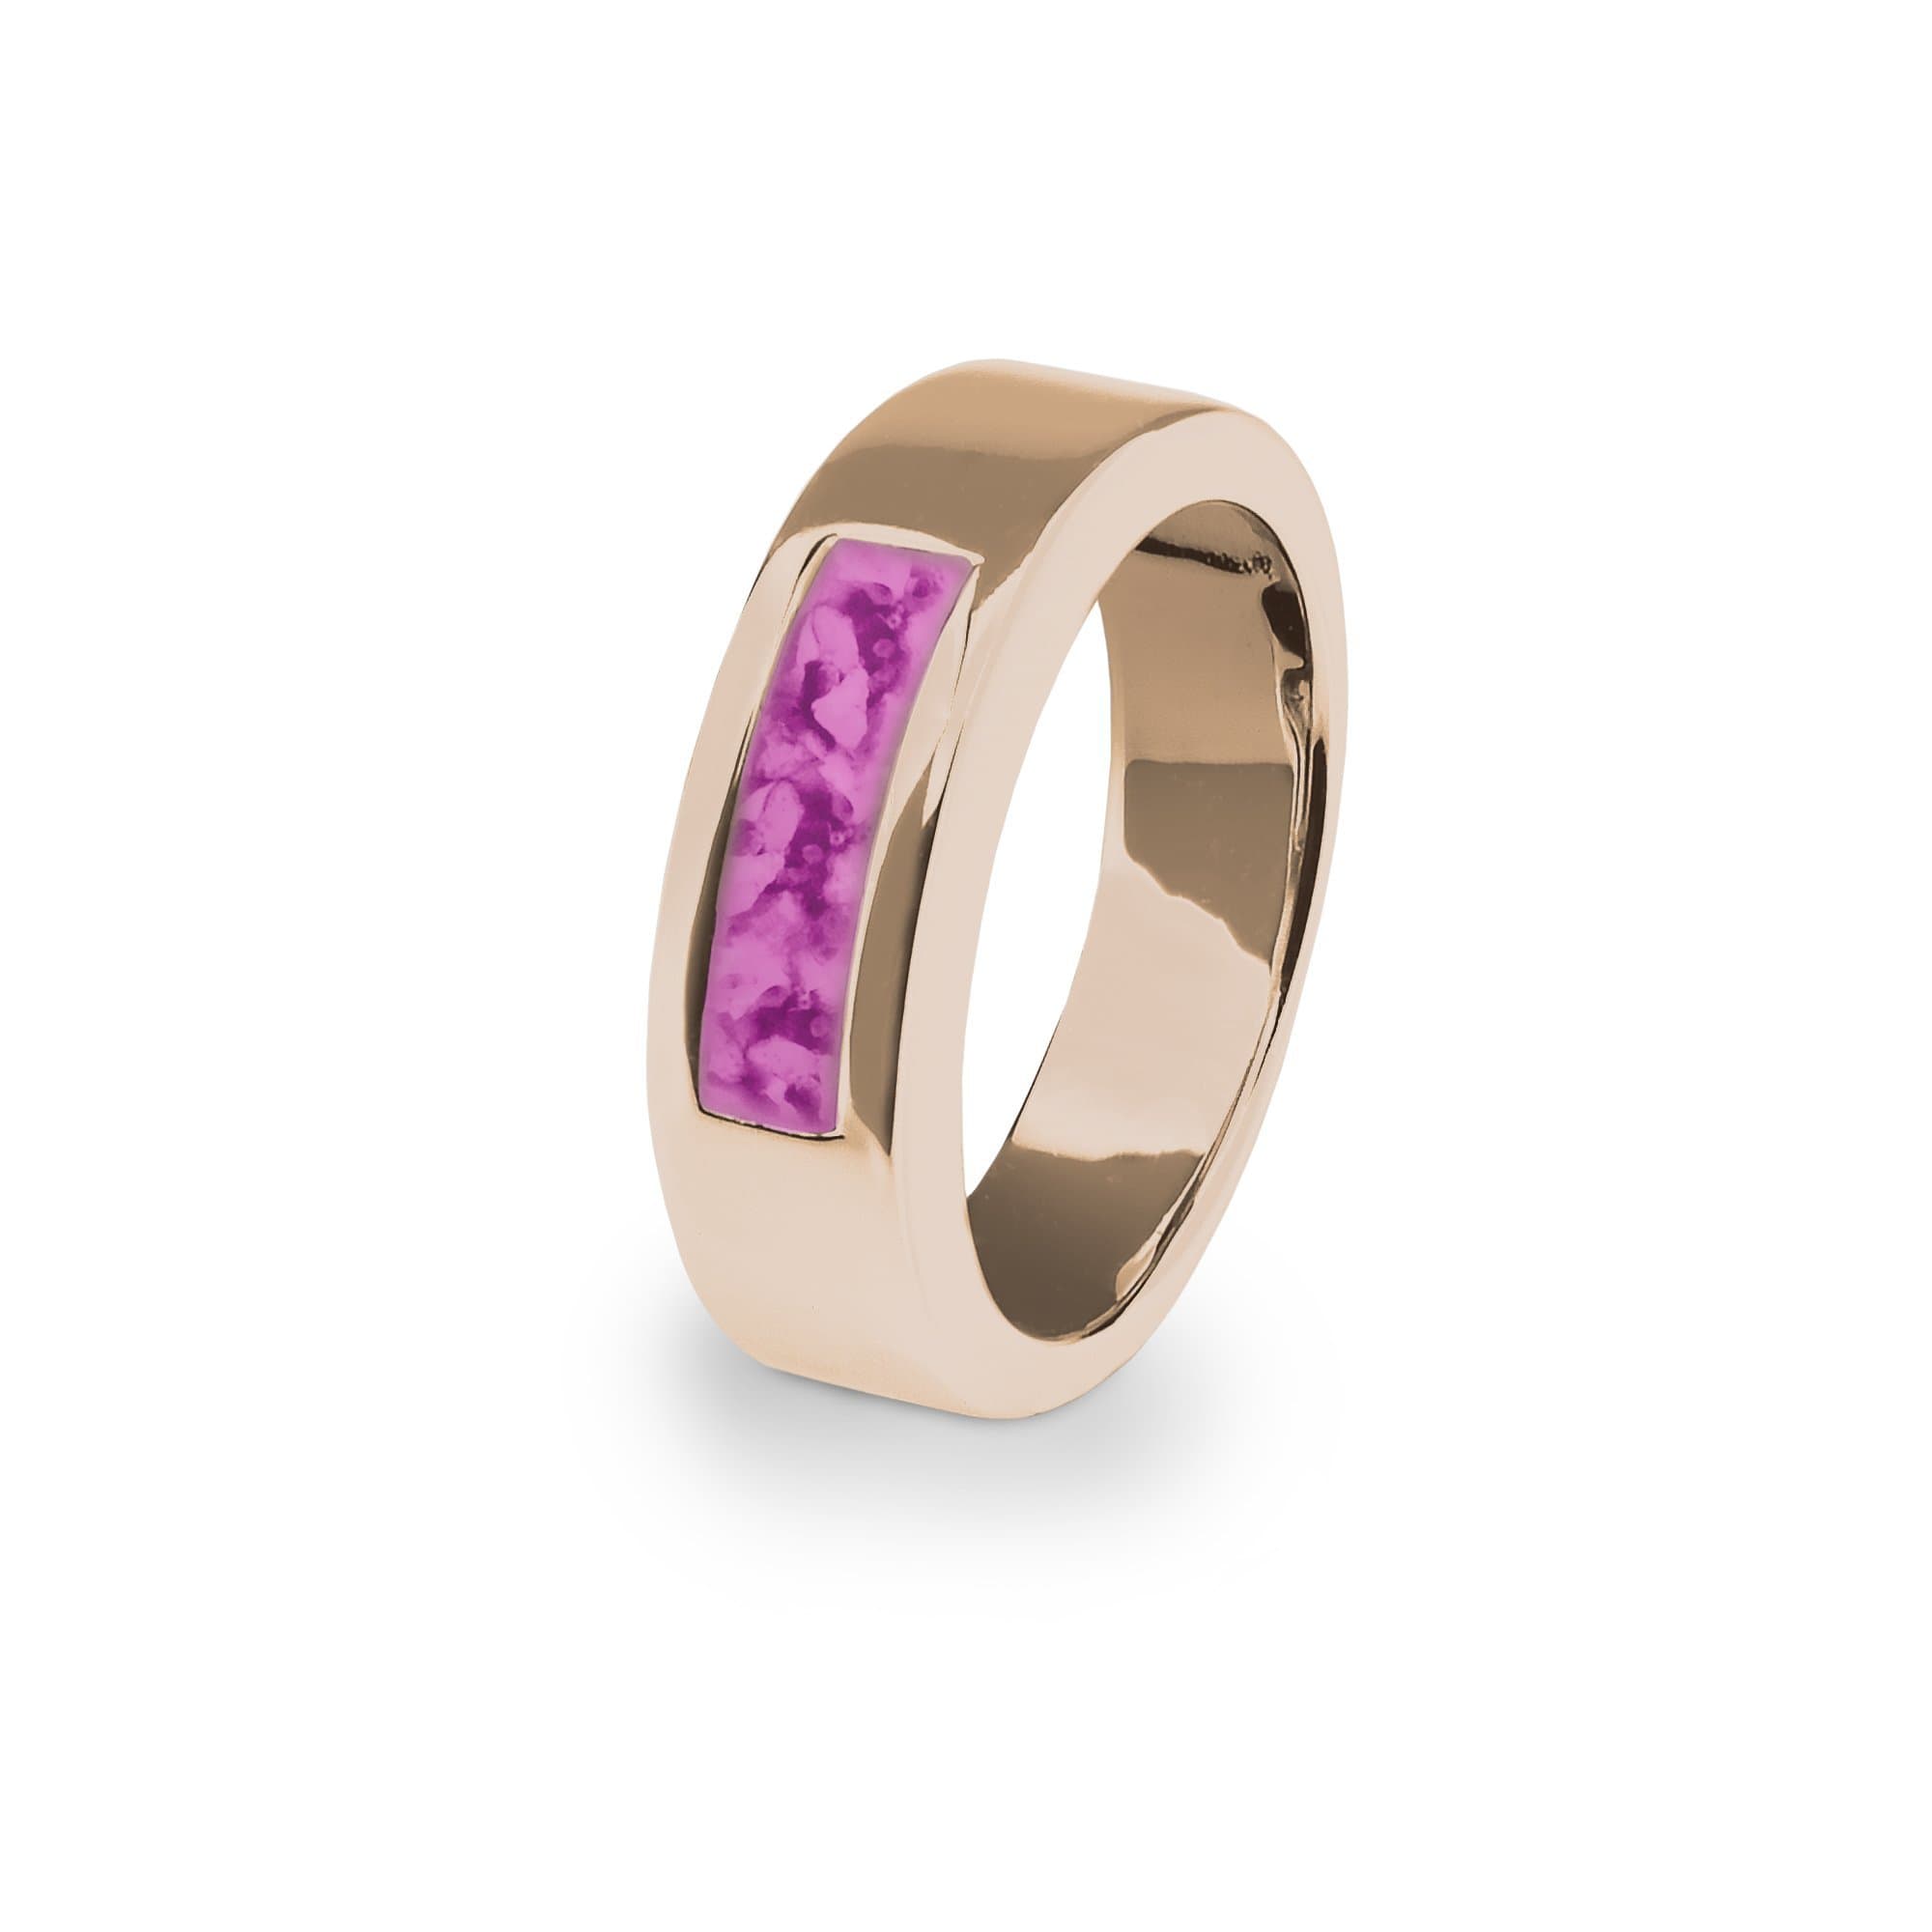 EverWith Unisex Pure Memorial Ashes Ring